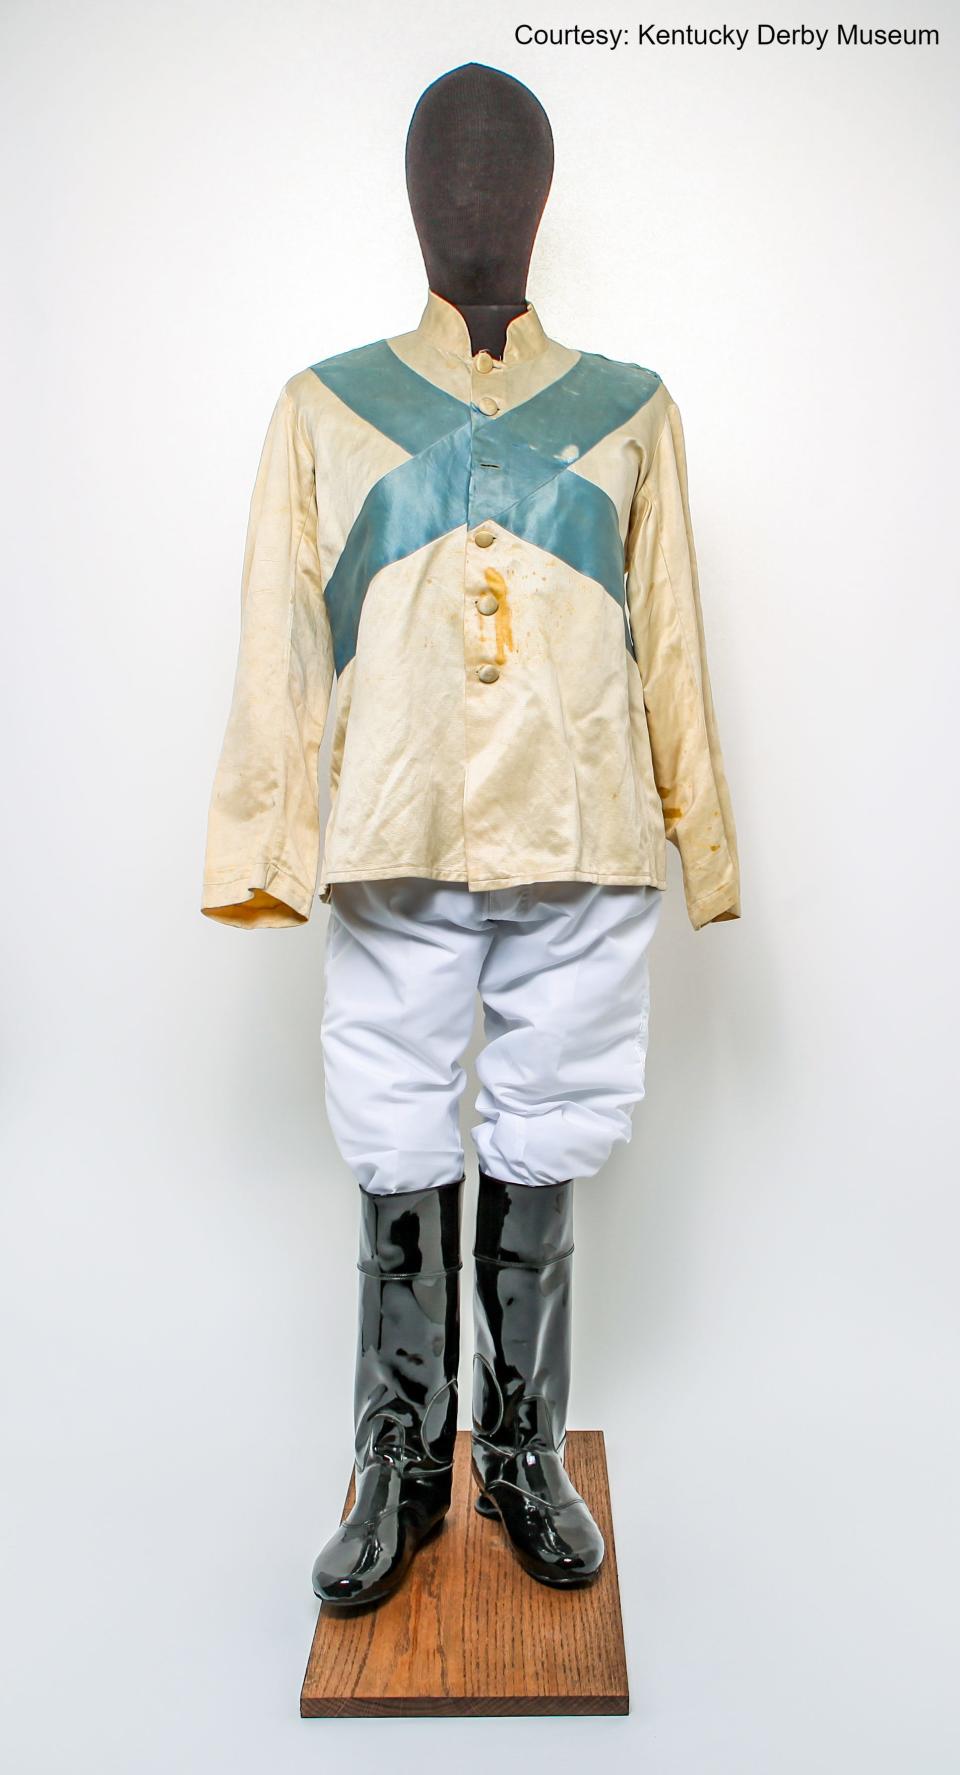 Isabel Dodge Sloane owned Brookmeade Stable, and she was a prominent breeder and owner of thoroughbred race horses for 36 years in the mid-20th century when it was less common for women to do so. These are the jockey silks worn by Mack Garner, who won the 1934 Kentucky Derby on Sloane's Cavalcade.